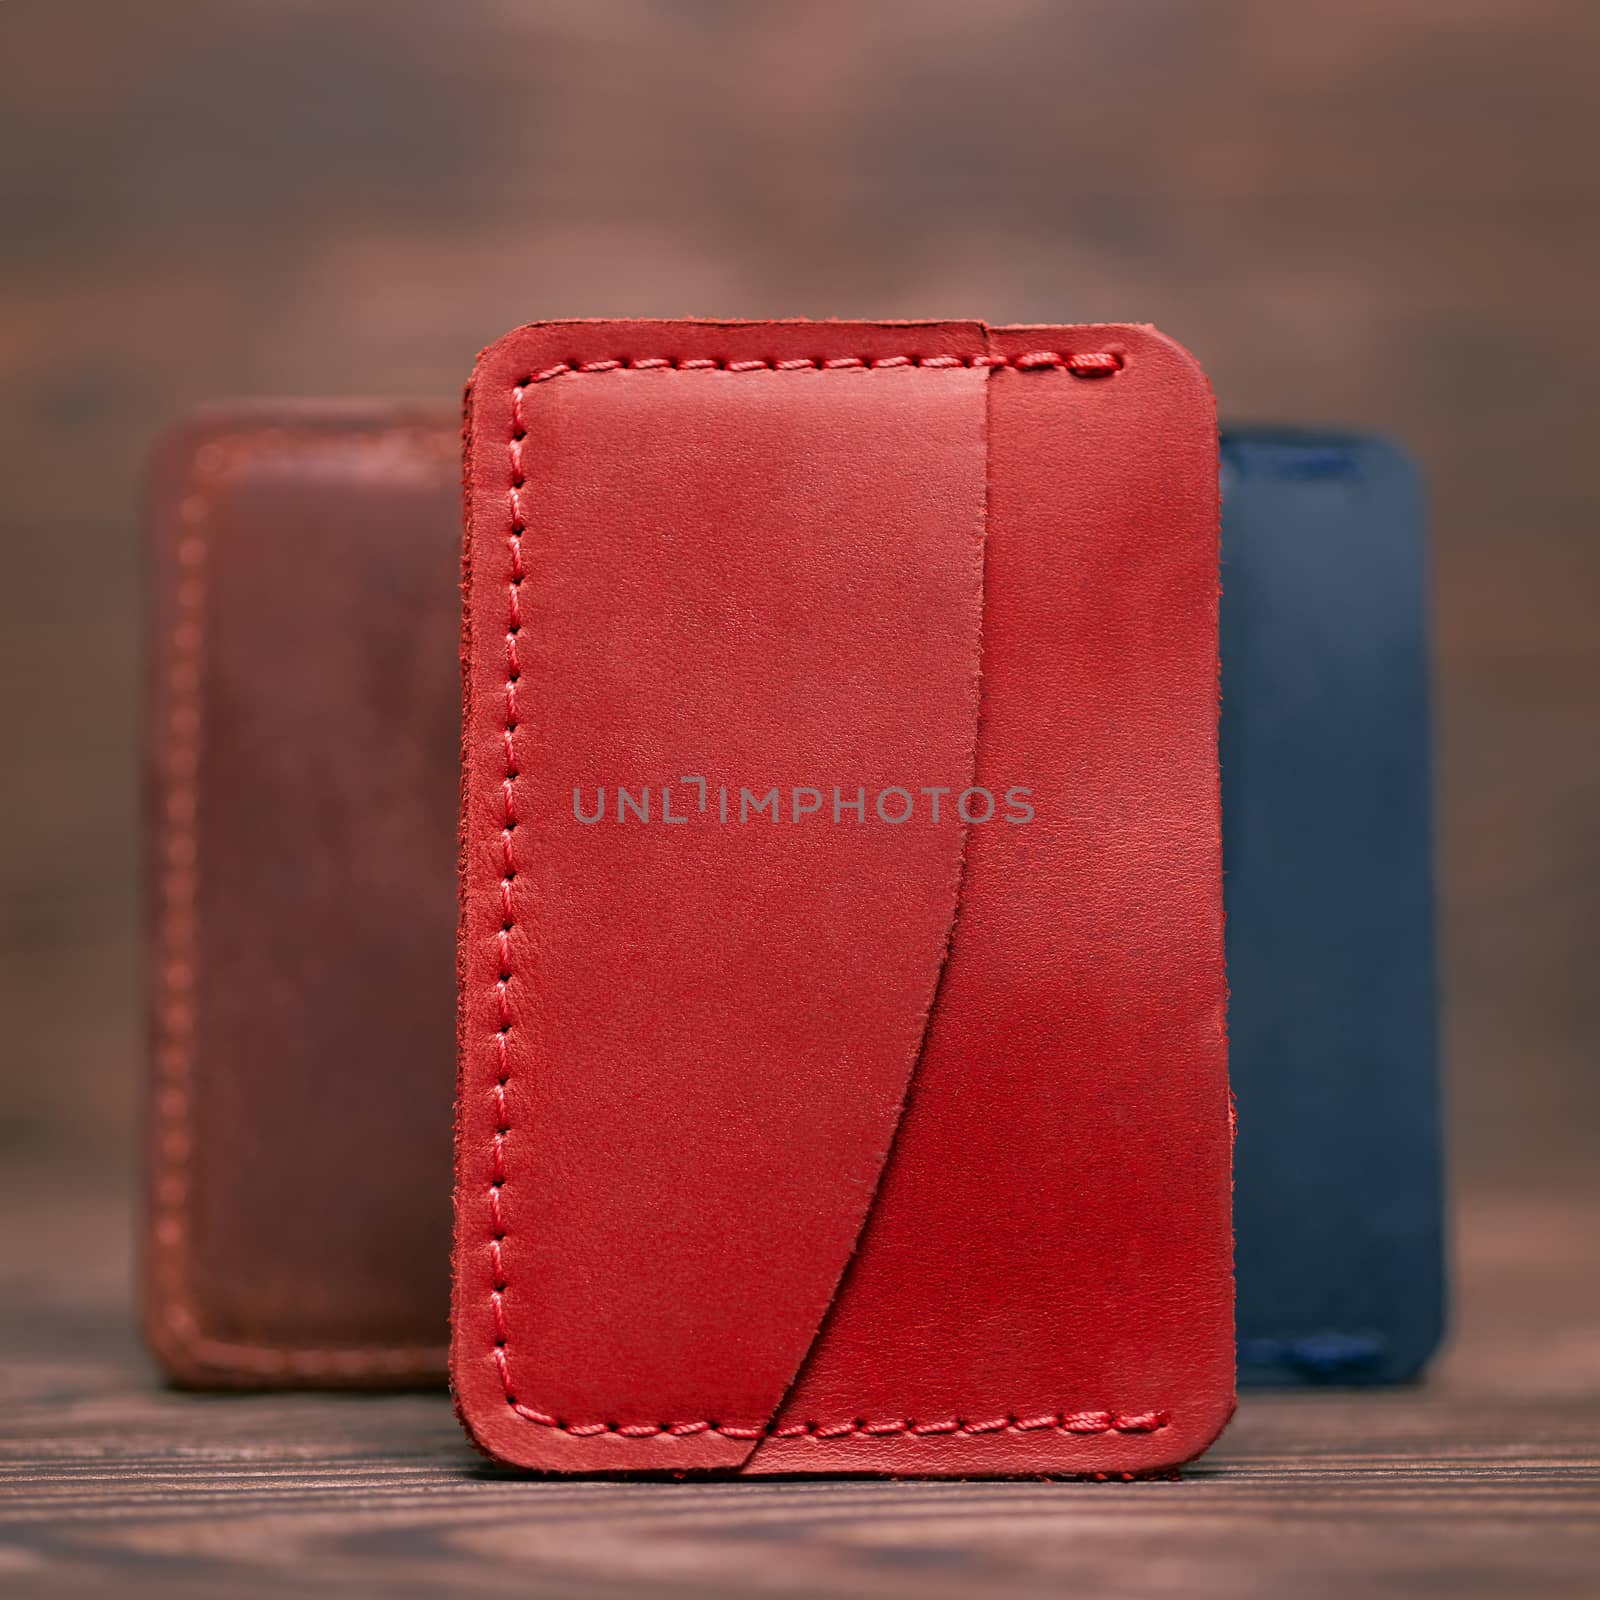 One pocket red leather handmade cardholder. On blurred background stay other colour cardholders. Stock photo on blurred background. by alexsdriver